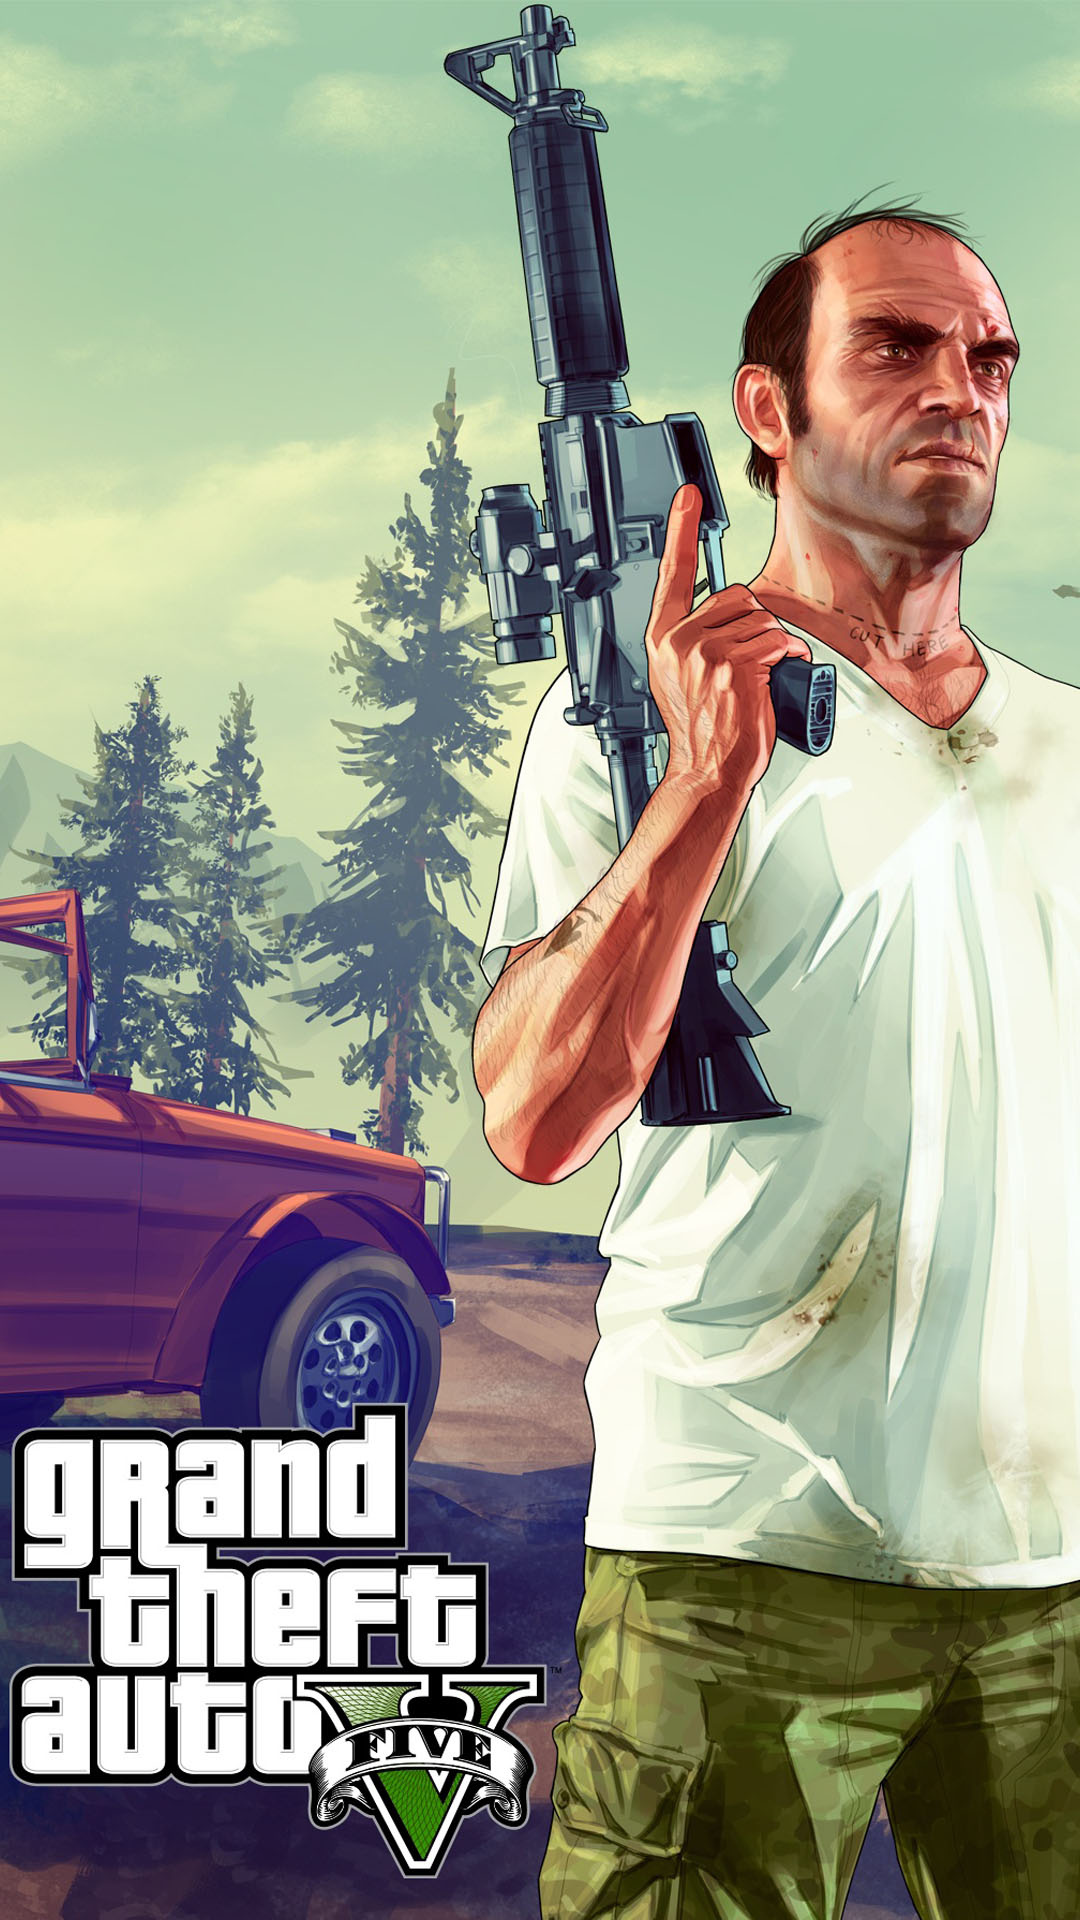 GTA V, Game of Thrones crossover, Epic wallpapers, Mashup masterpiece, 1080x1920 Full HD Phone